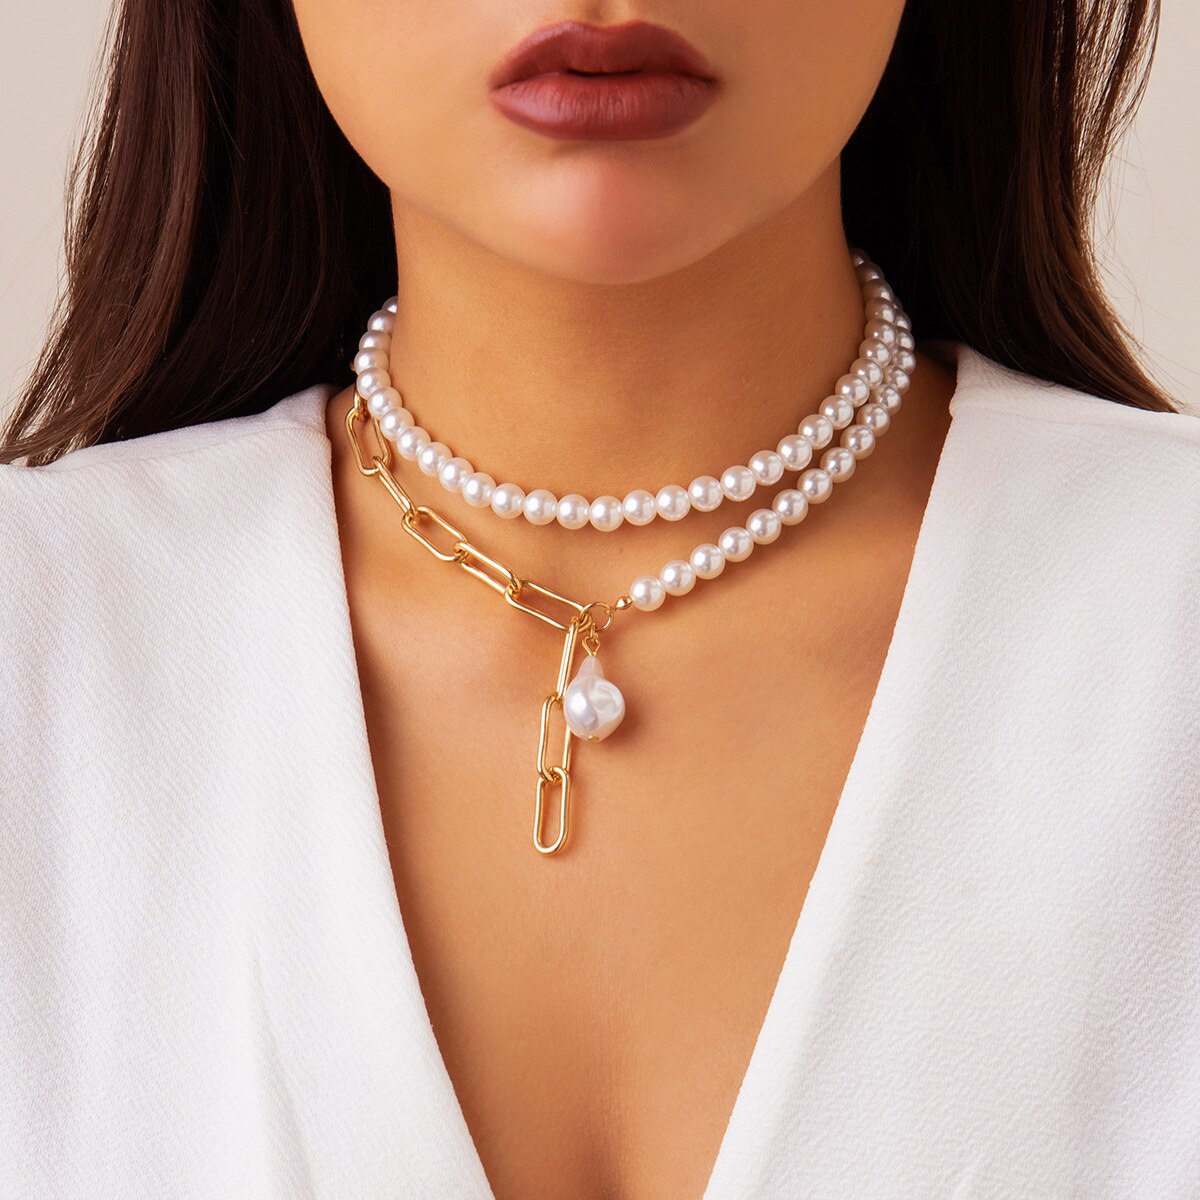 Maytrends Vintage Natural Pearl Multilayer Sexy Choker Necklace Women Irregular Water Droplet Pendant Wed Bridal Bead Chain Neck Jewelry